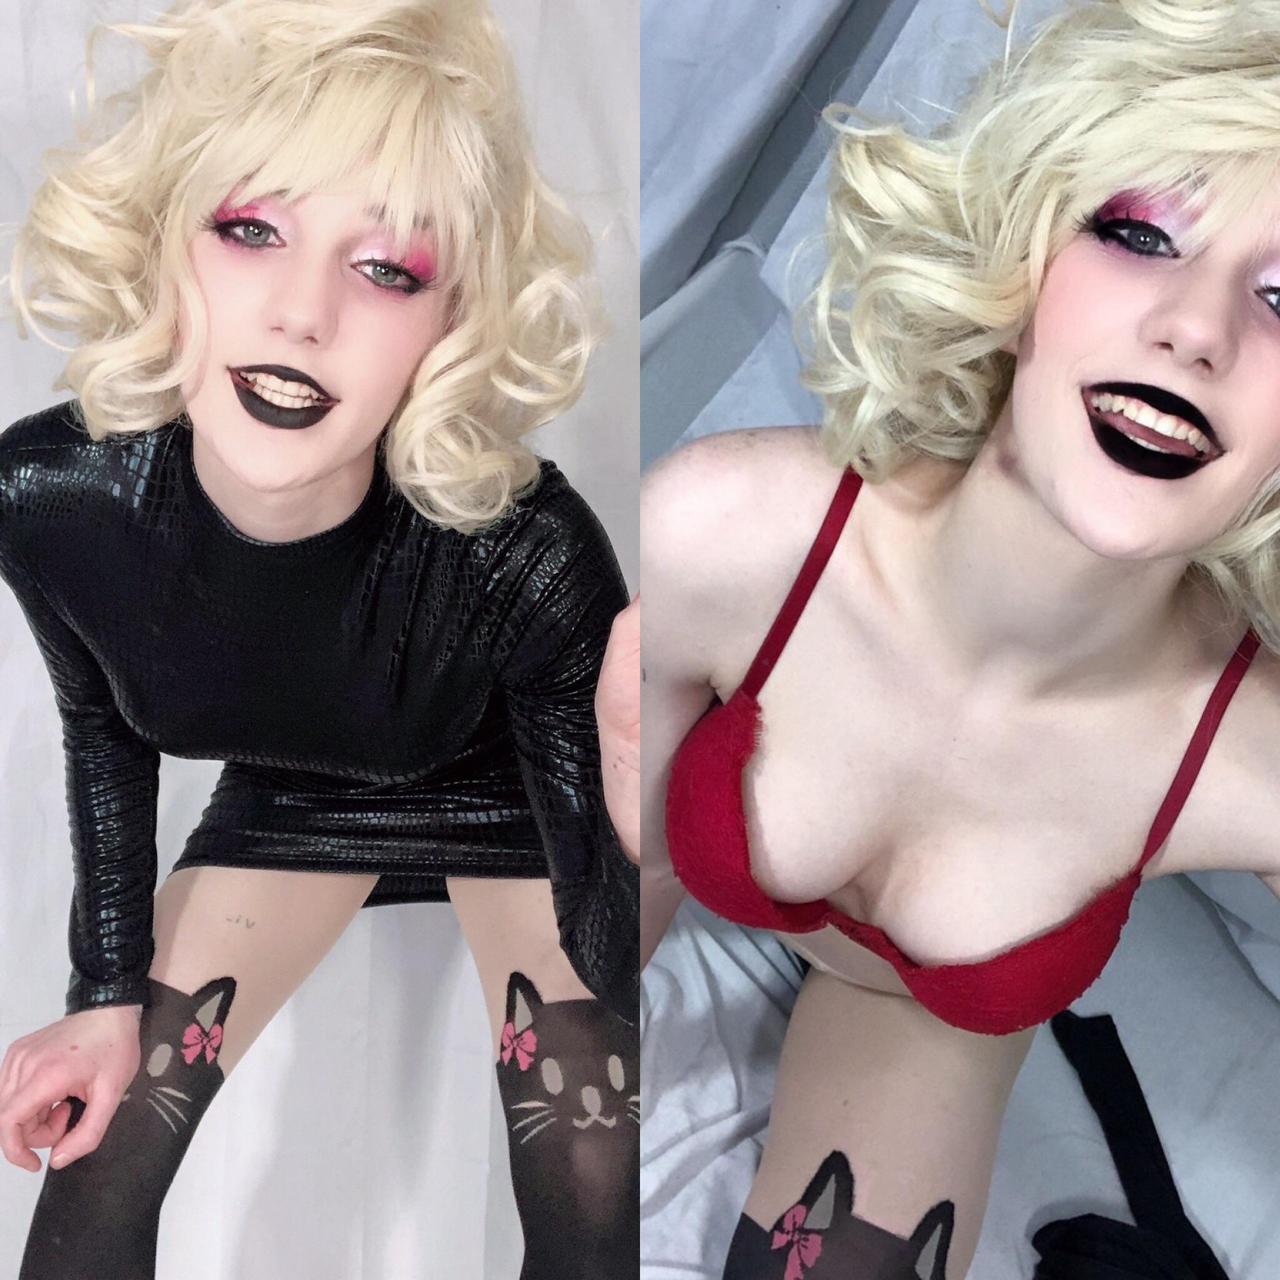 Betaroxy Aka Mom Lalonde From Homestuck Cosplay By Me Discount Yam On Instagra